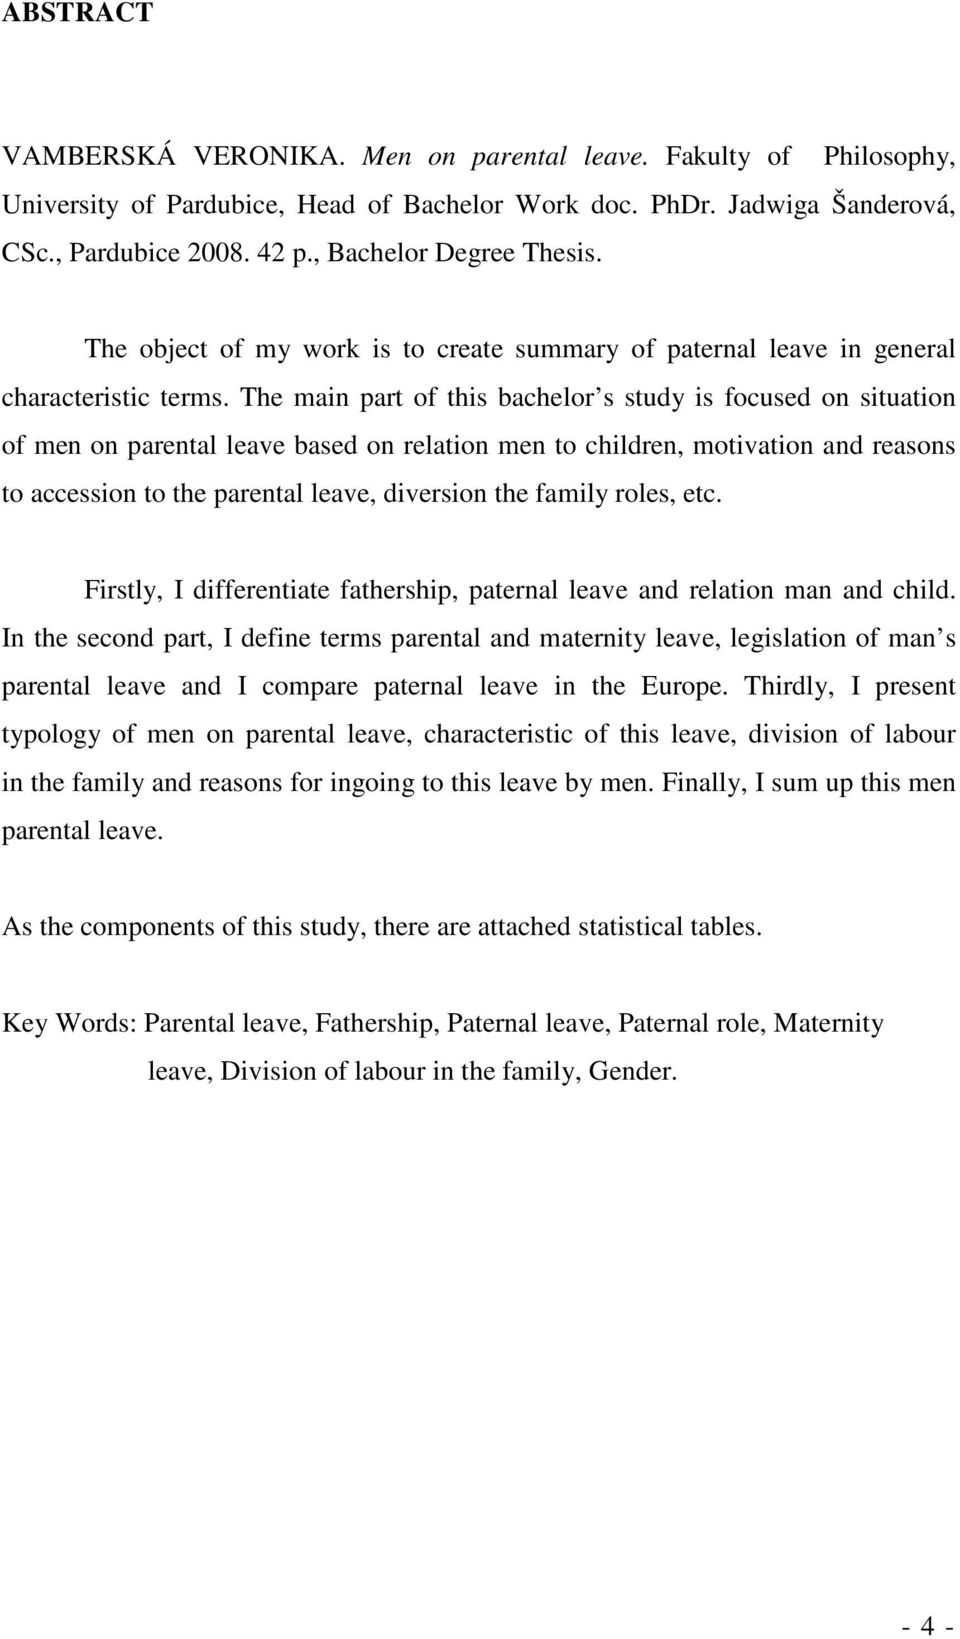 The main part of this bachelor s study is focused on situation of men on parental leave based on relation men to children, motivation and reasons to accession to the parental leave, diversion the